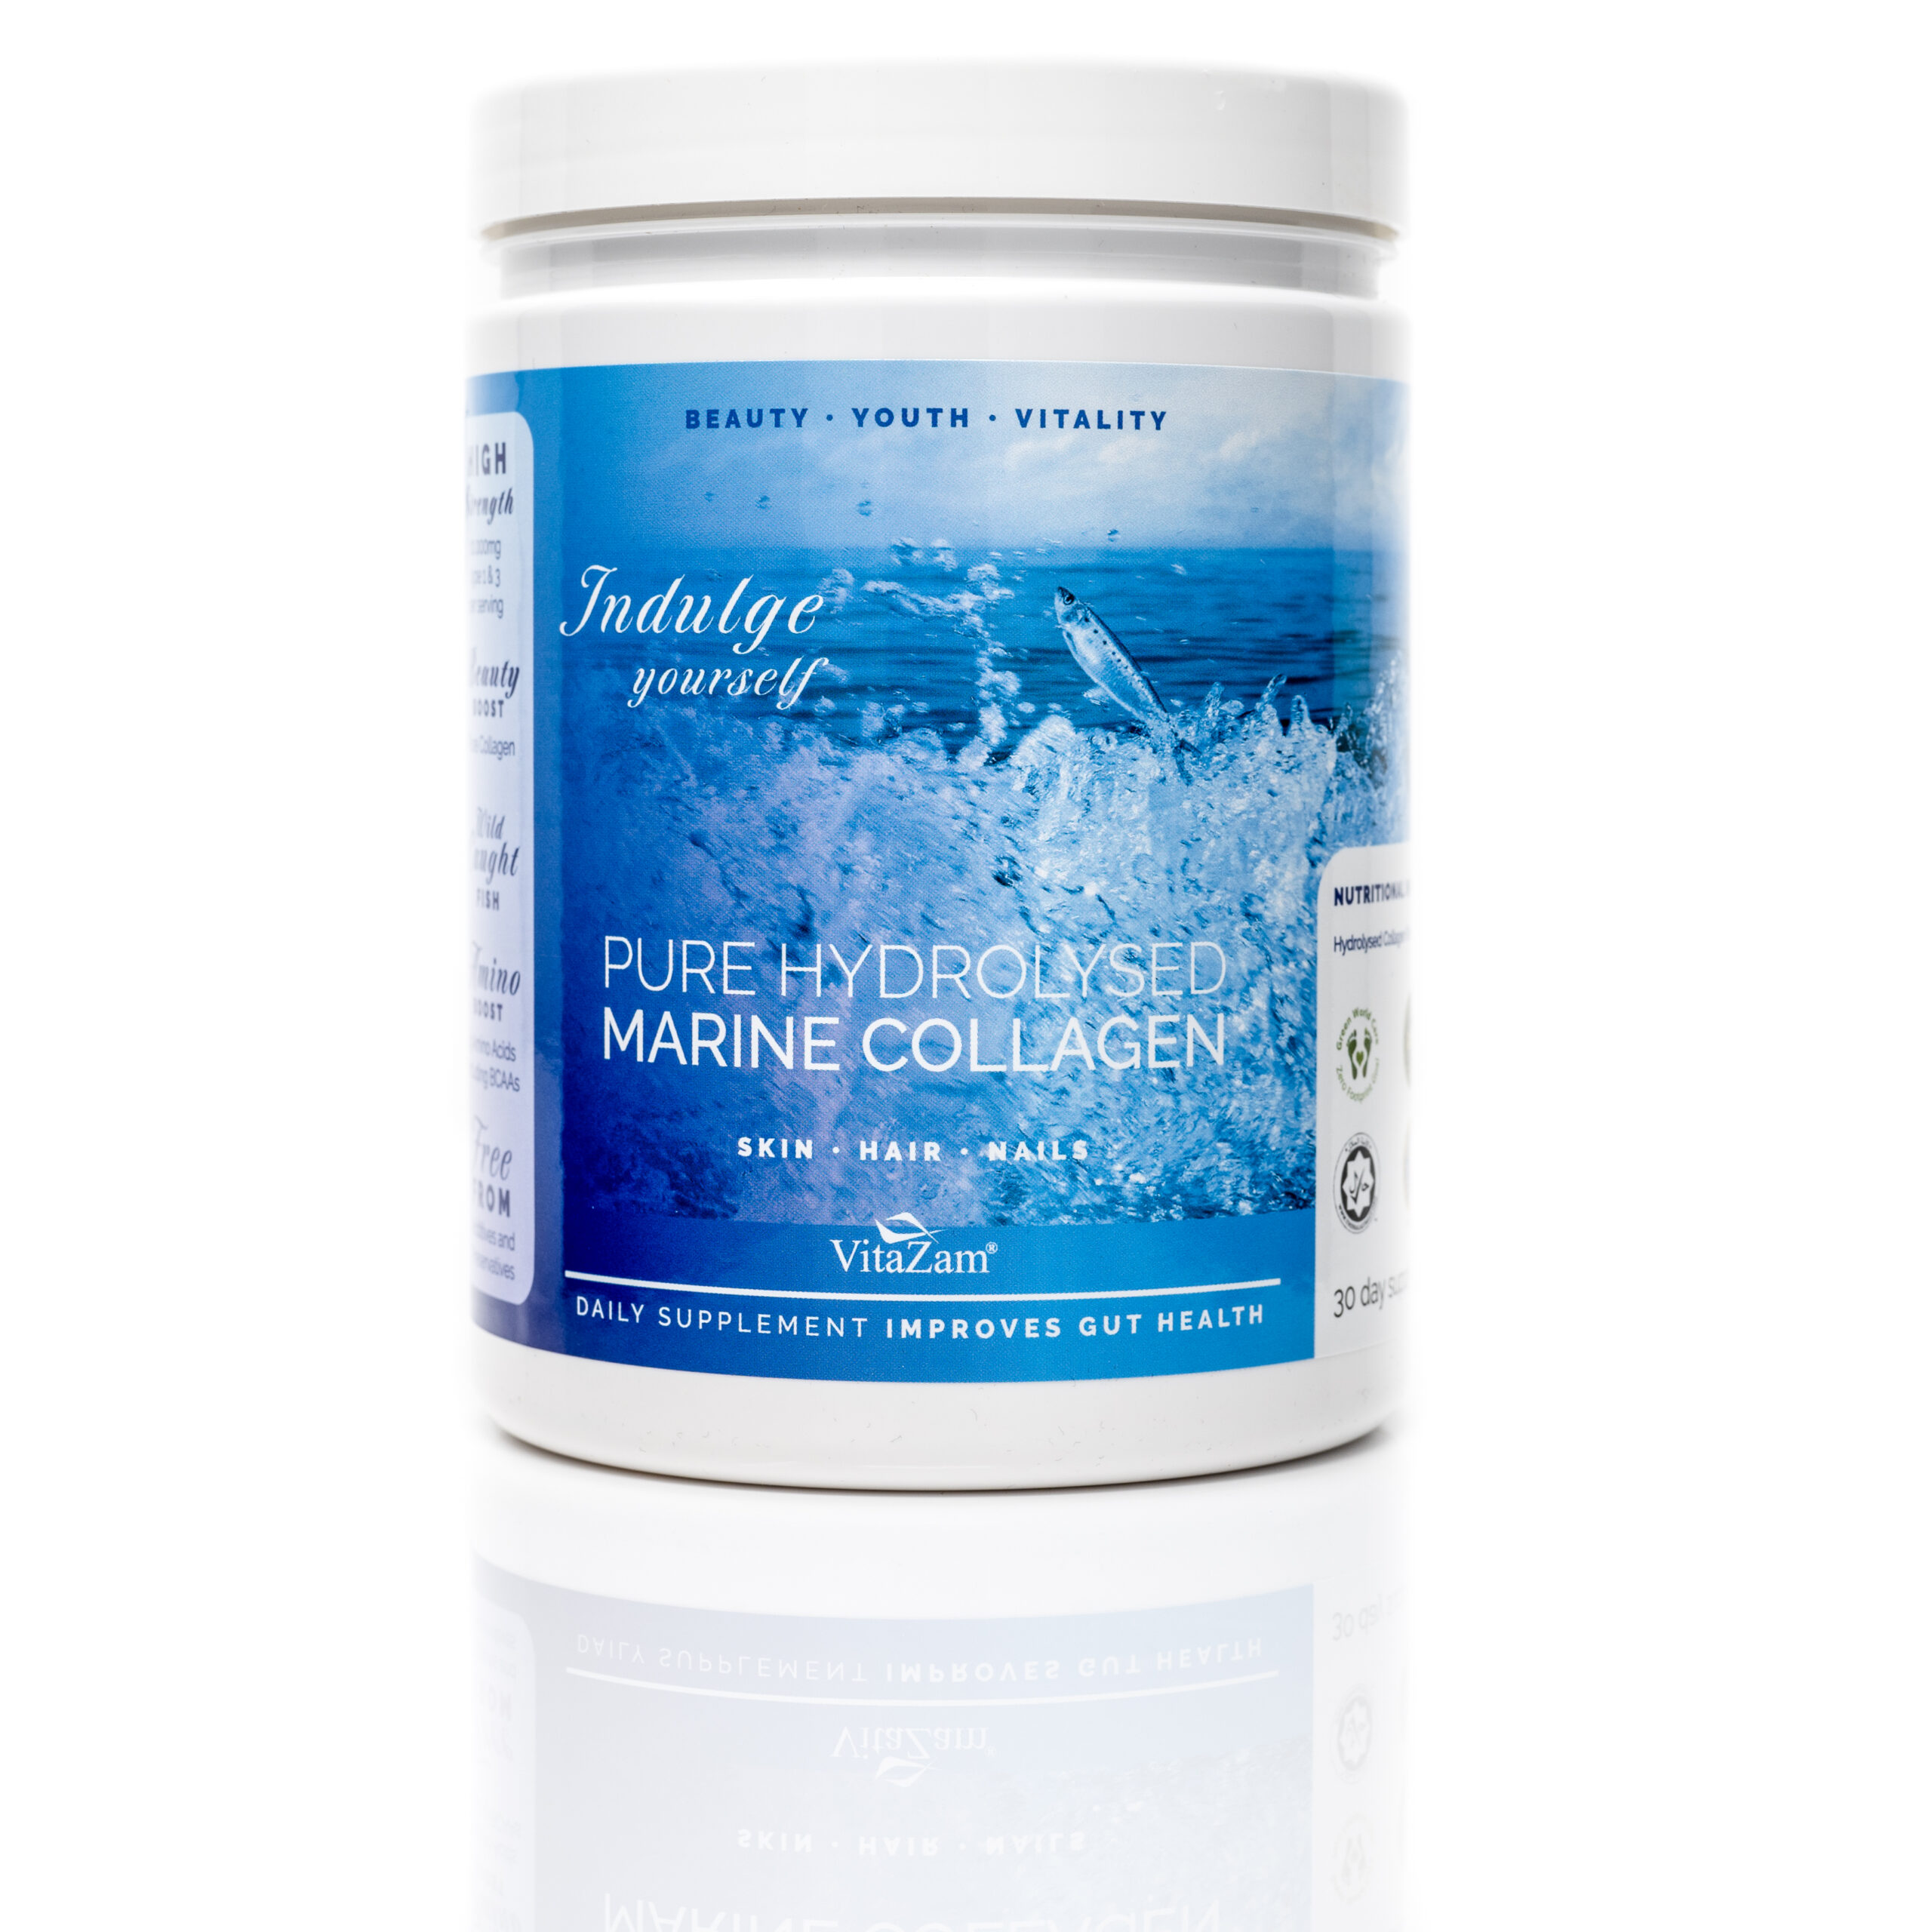 Pure Hydrolysed Marine Collagen Powder for Hair, Skin, Nails, Joints & Muscles | 30 Days Supply